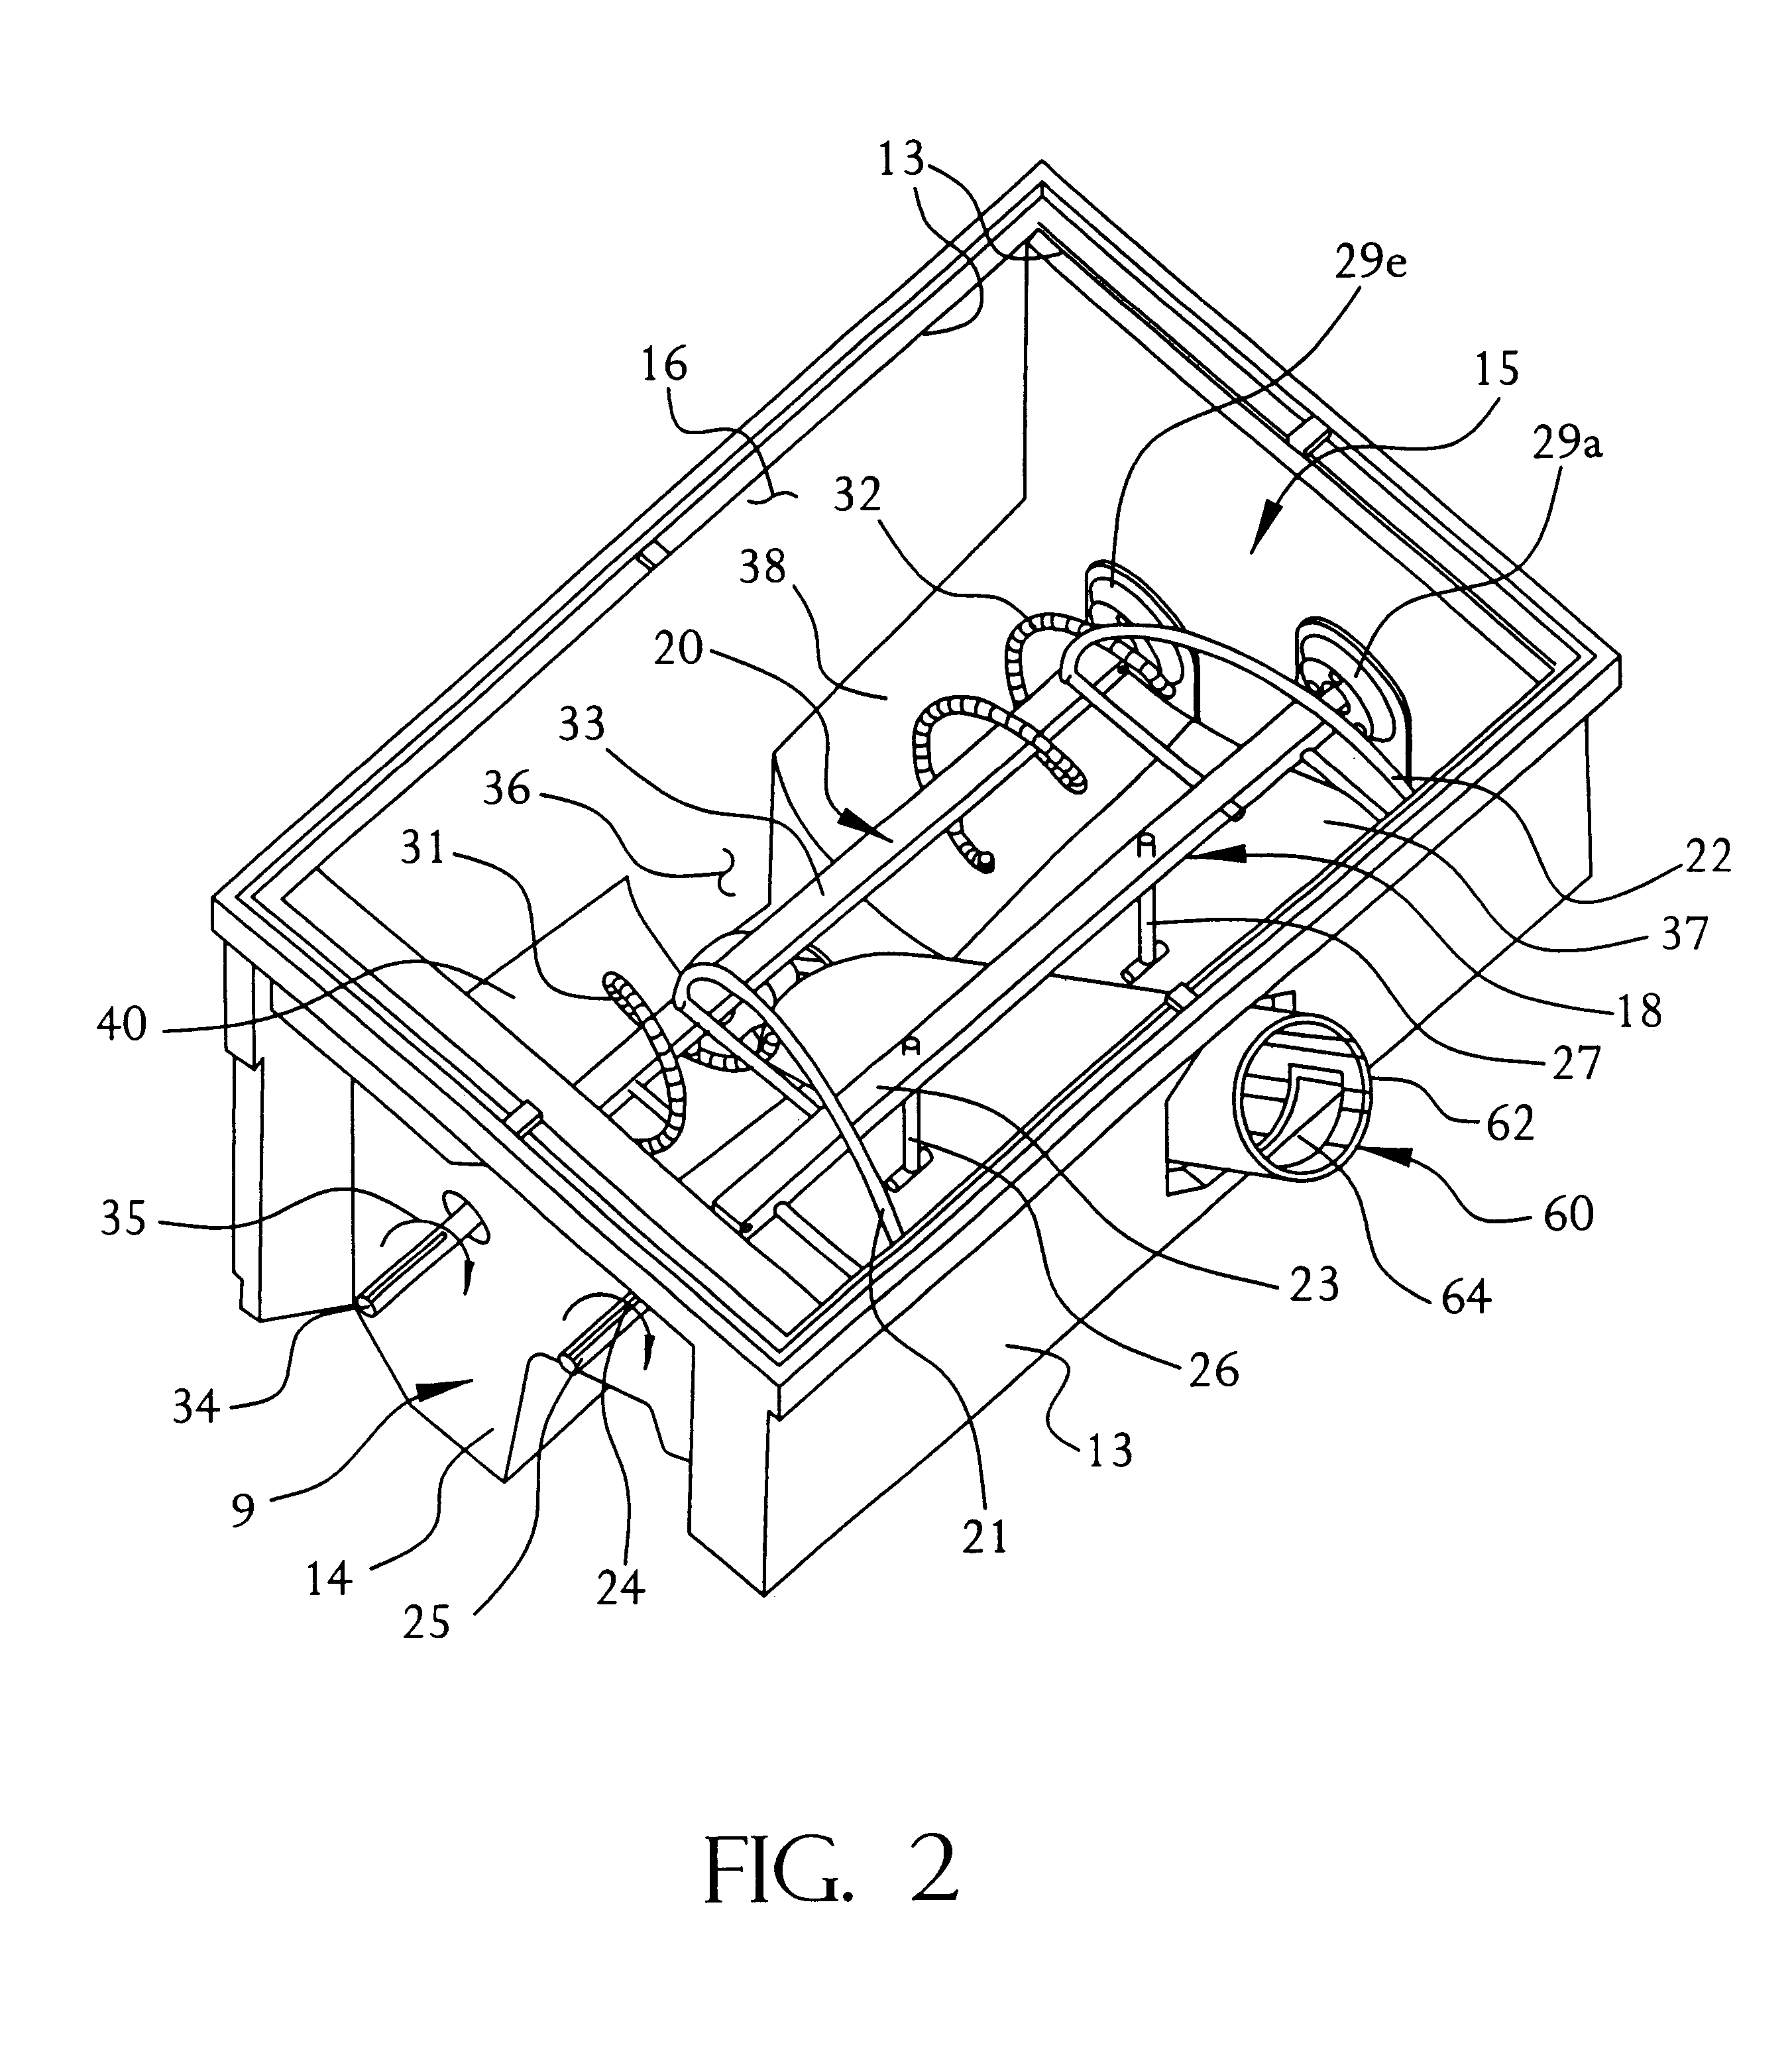 Apparatus for removal of ice from a storage bin